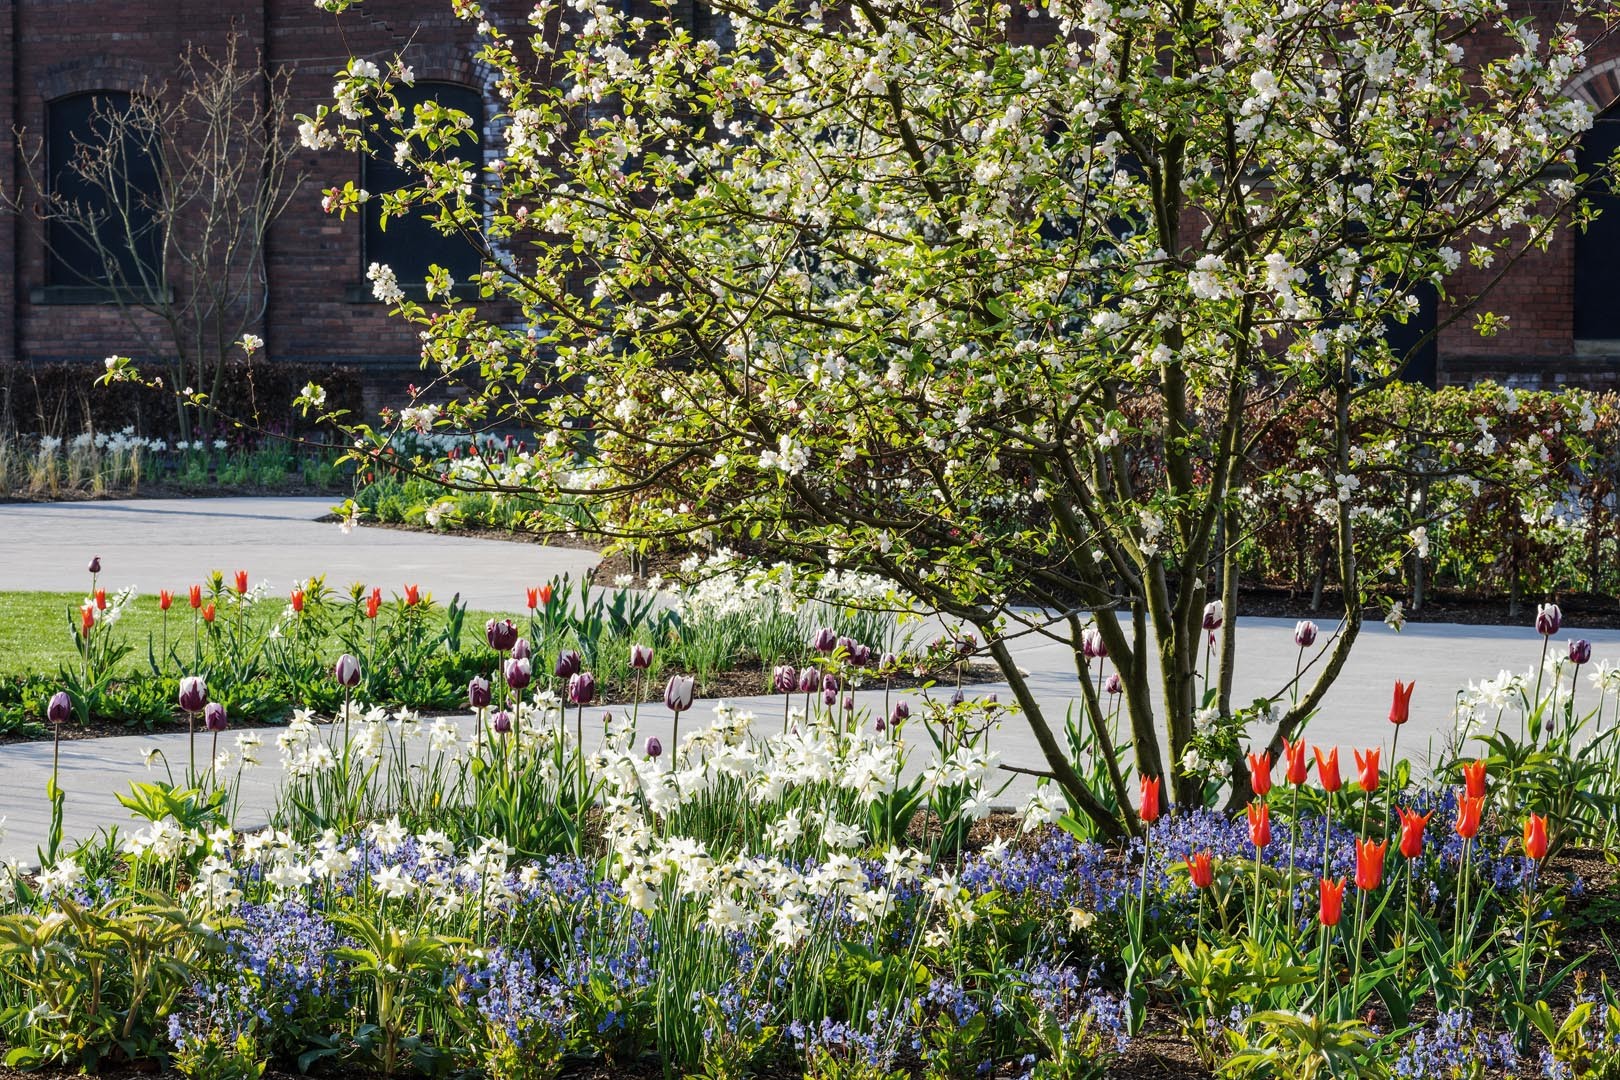 In spring the white of the blossom of Malus ‘Evereste’ and daffodils ‘Thalia’ and ‘Toto’ is offset by a sea of blue Omphalodes cappadocica ‘Cherry Ingram’, the purple and white Tulipa ‘Rems Favourite’ and orange T. ‘Ballerina’.